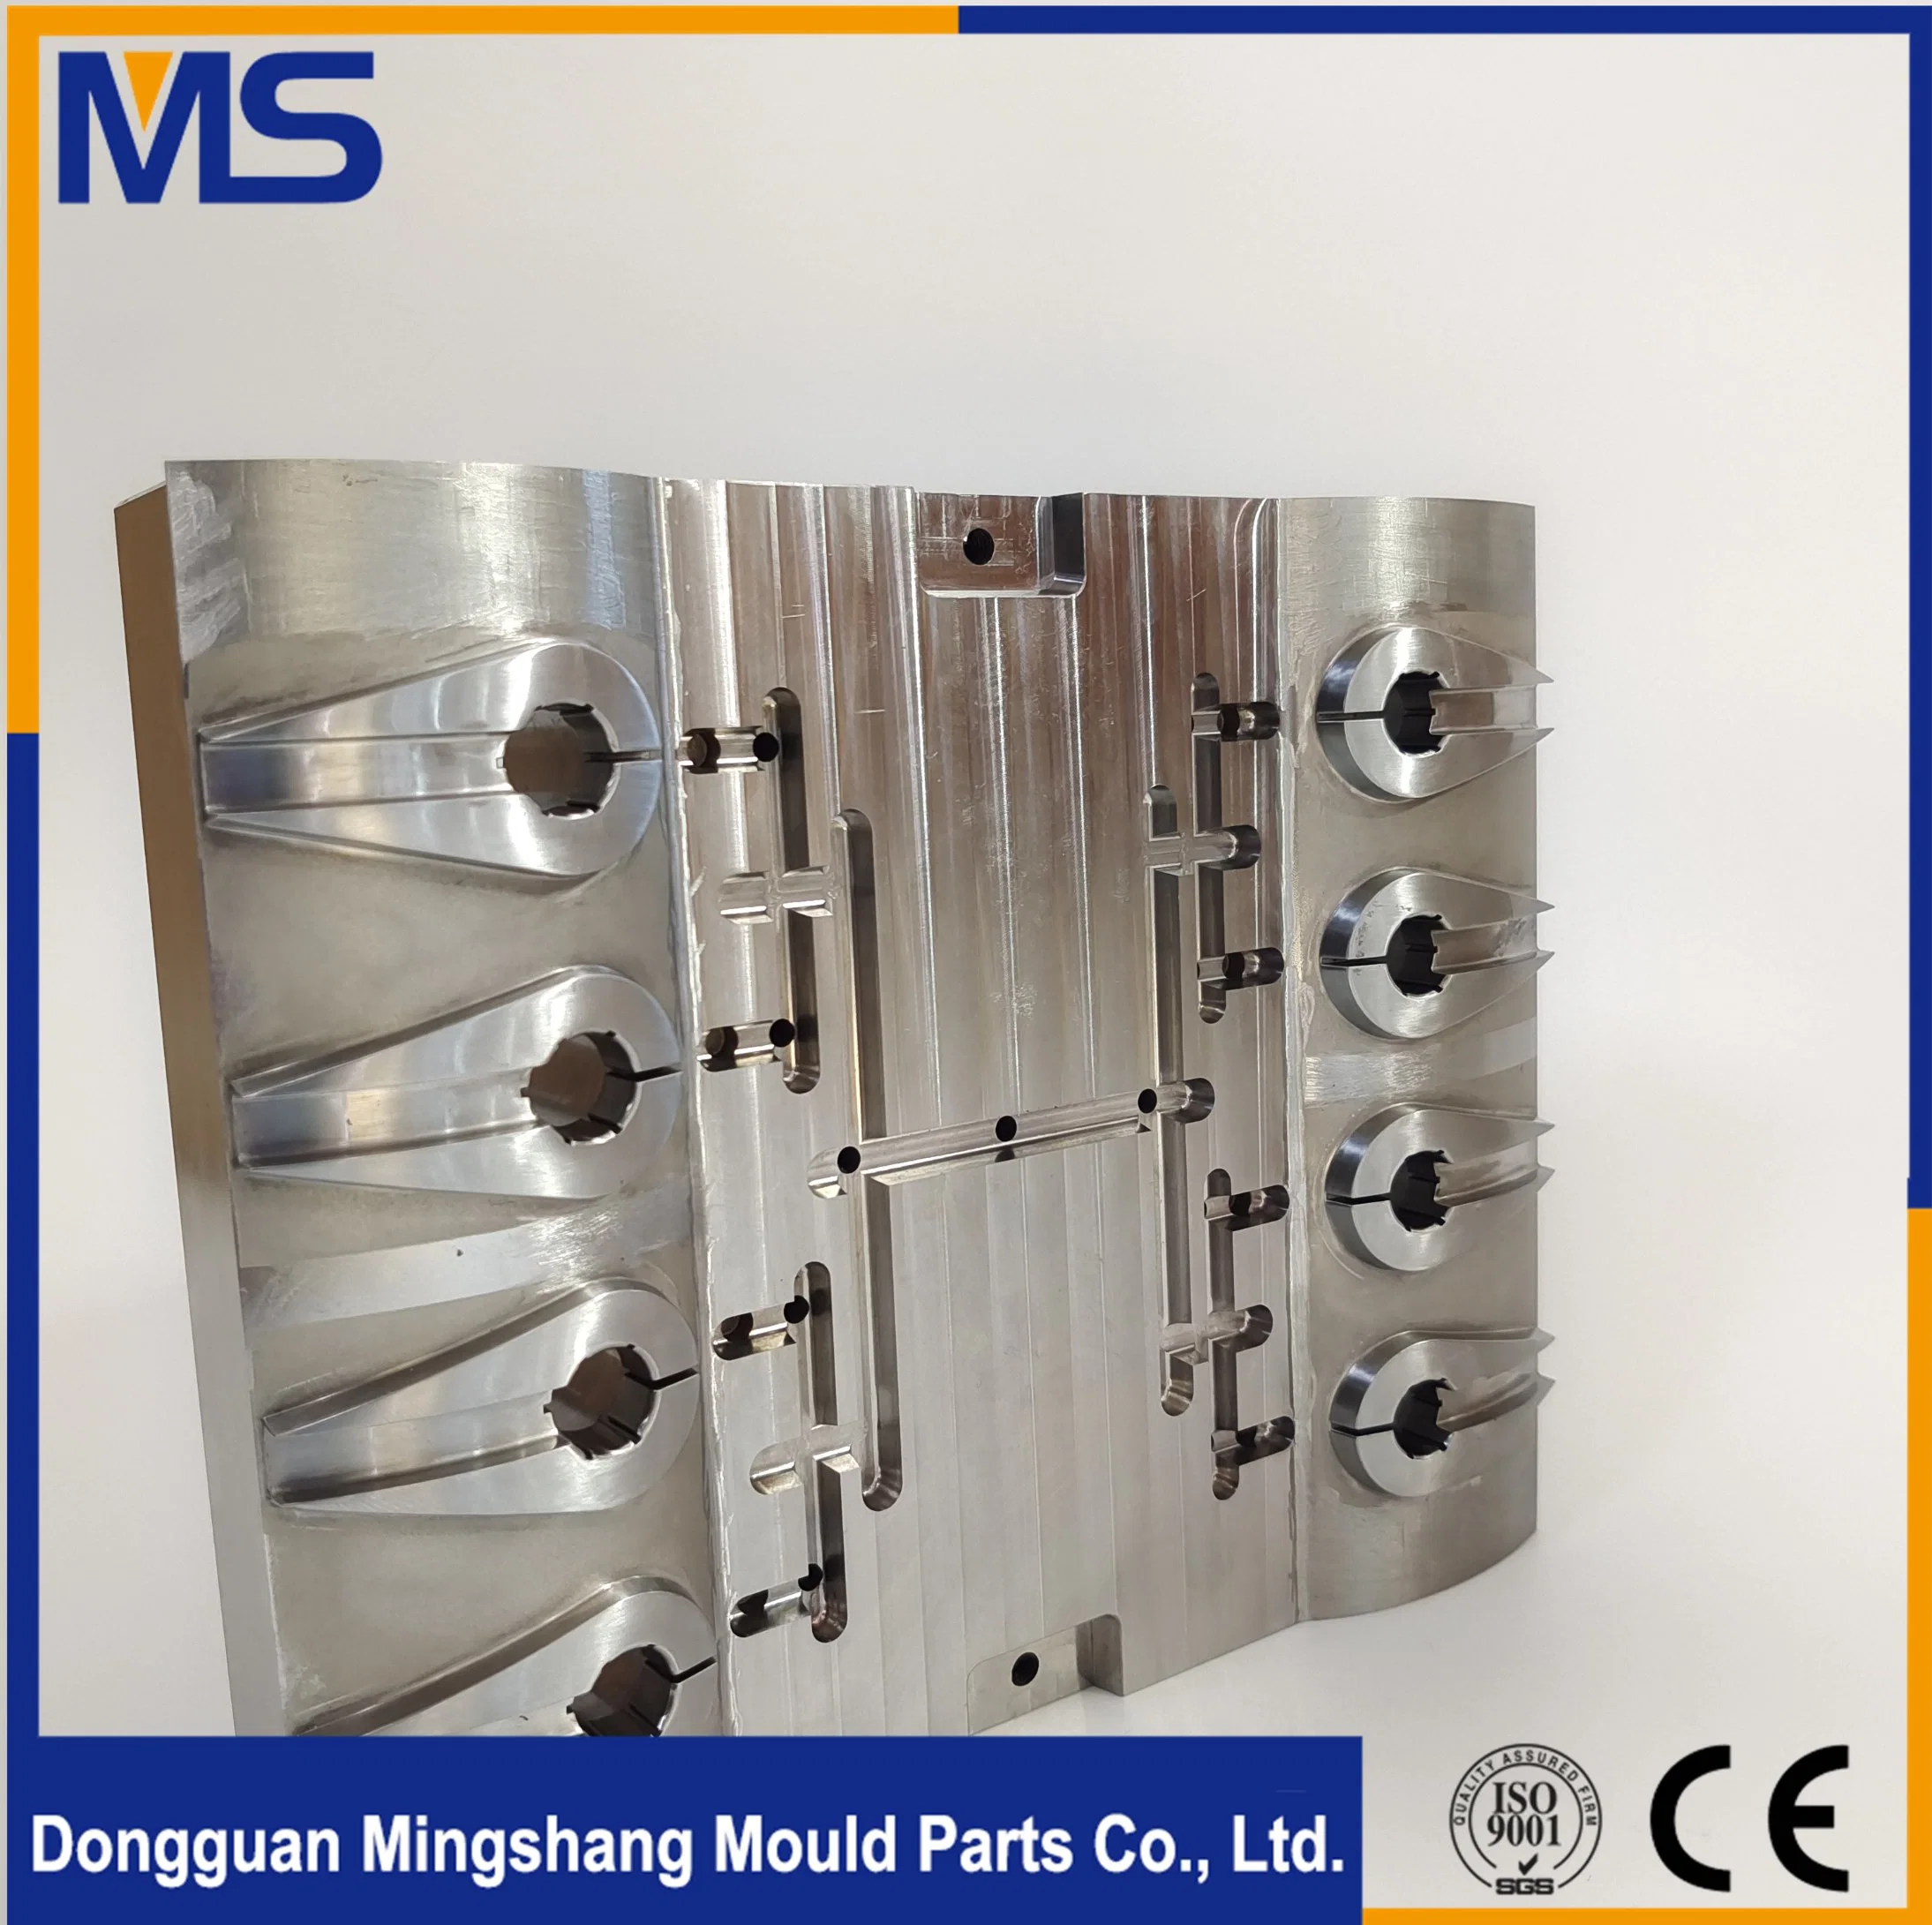 Professional Mold, Mold Parts Manufacturer, Plastic Hand Sanitizer Bottle Gland, Injection Mold, OEM ODM Service, Customized Injection Mold Core